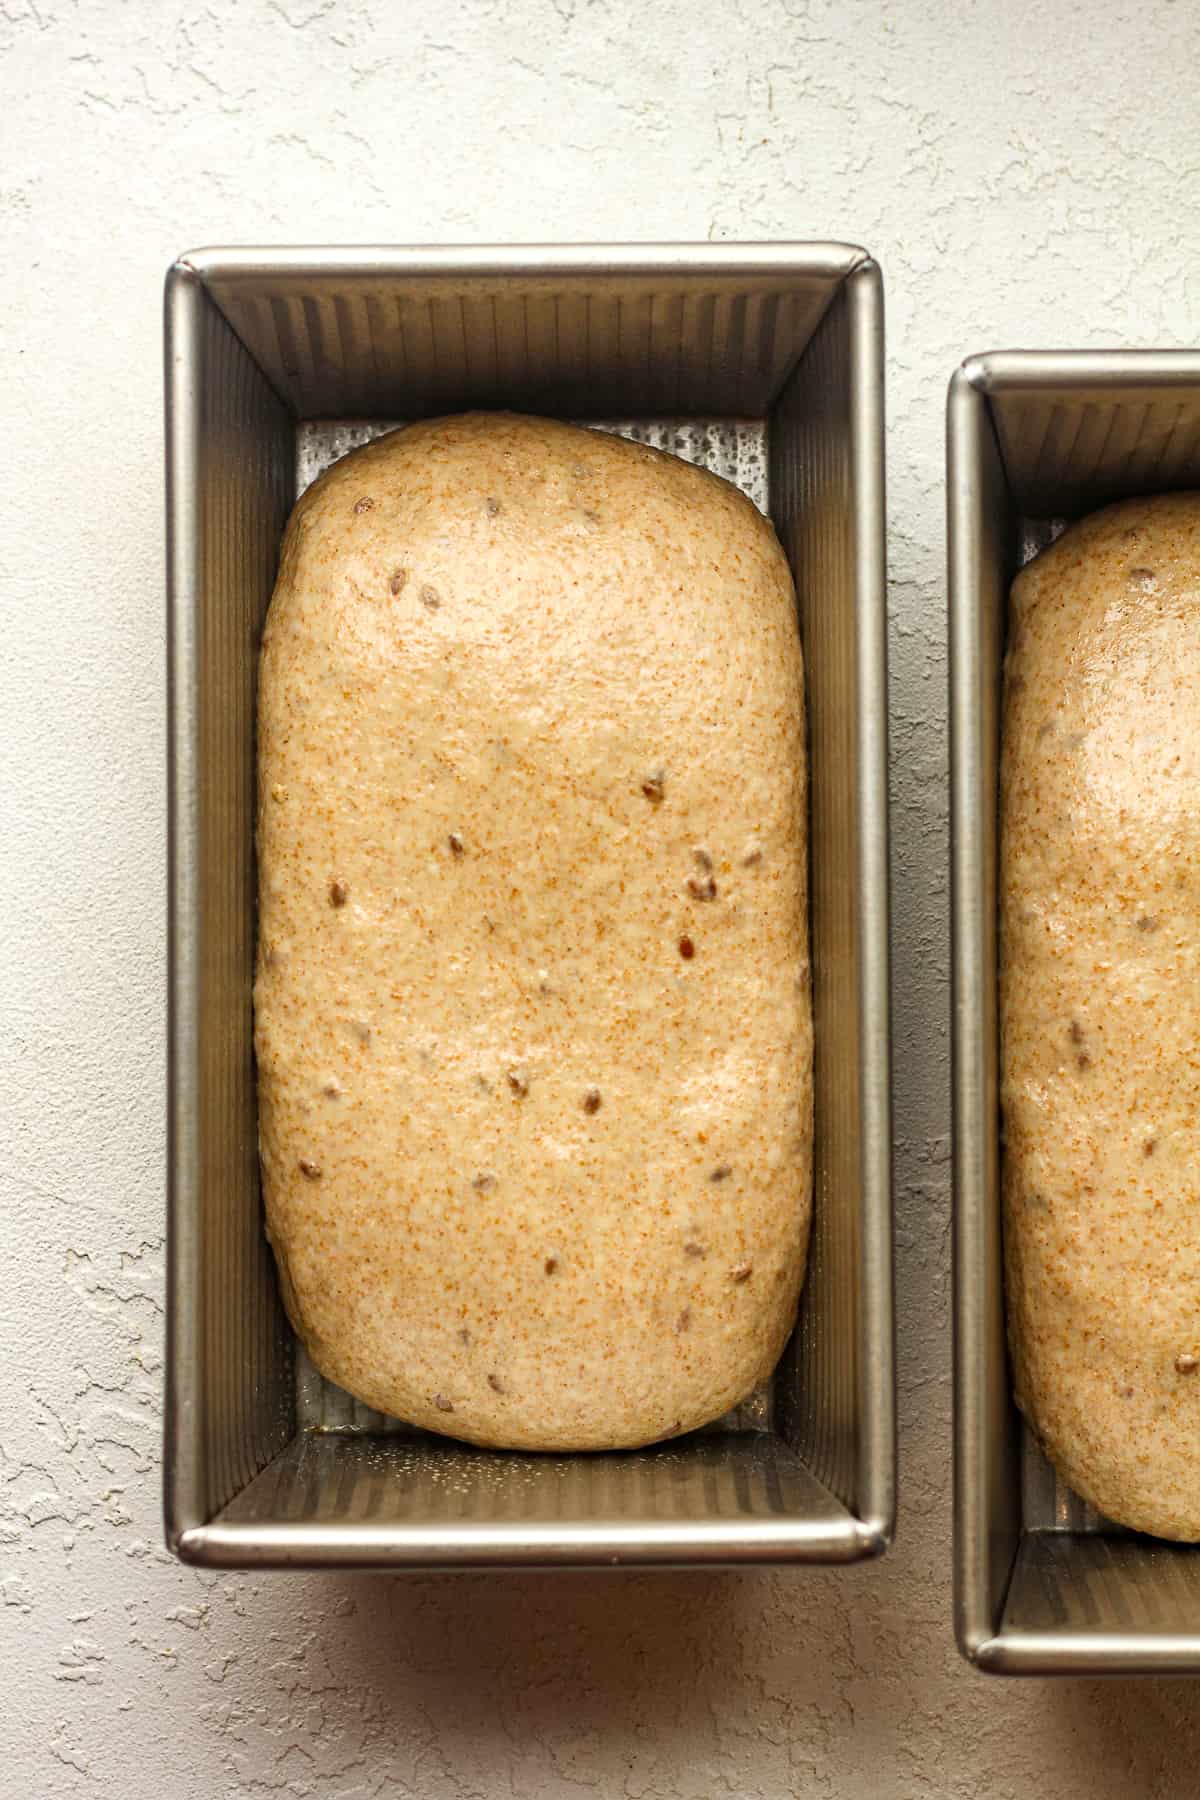 Two loaf pans of the dough before rising.